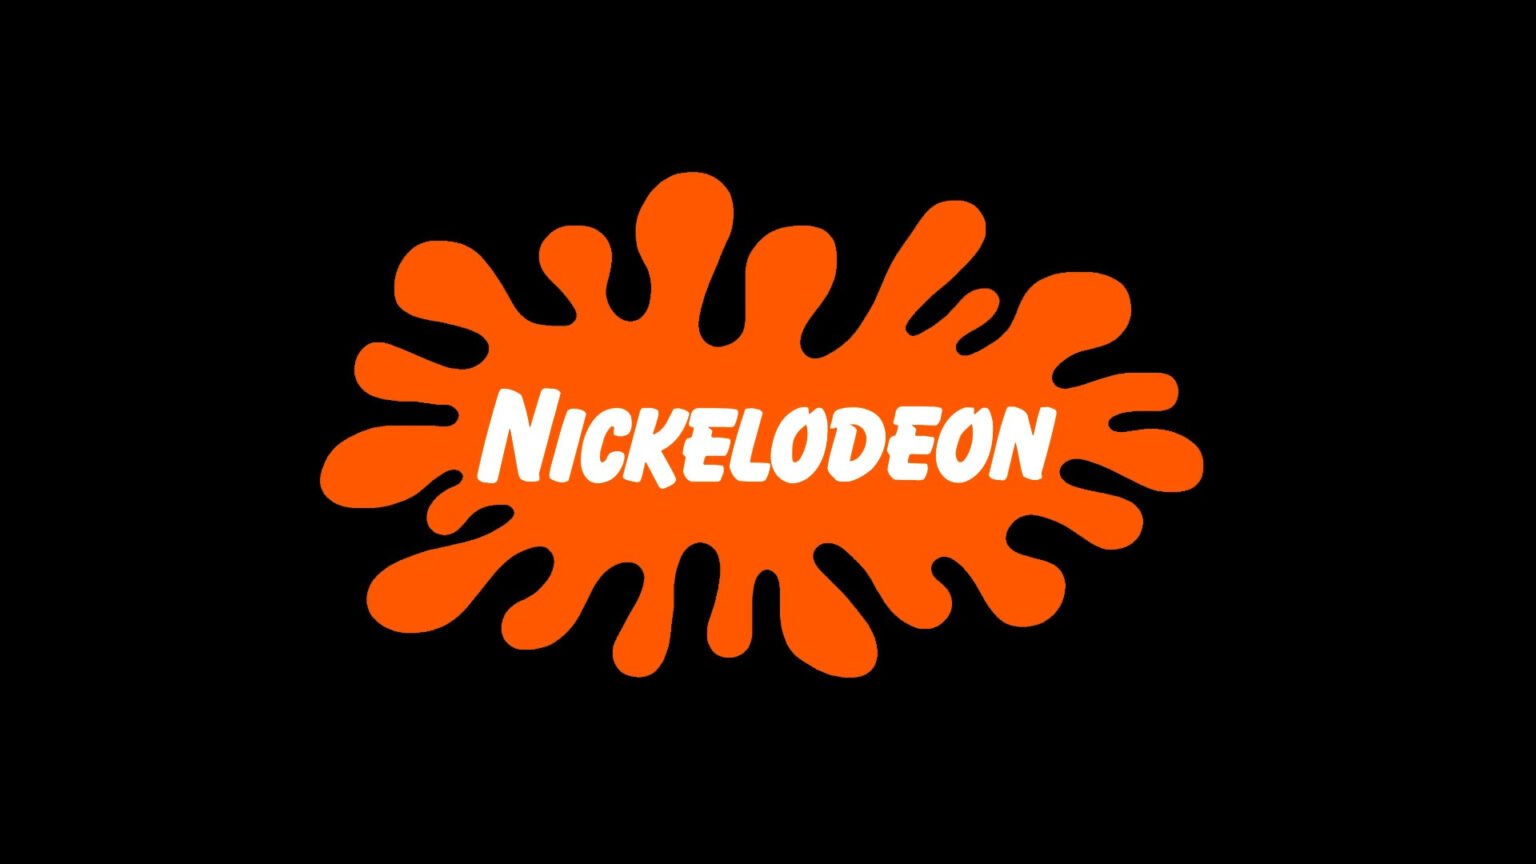 A cartoon smartwatch? But why? Nickelodeon sure sounds animated about this new concept, but will nostalgia help sell these watches?